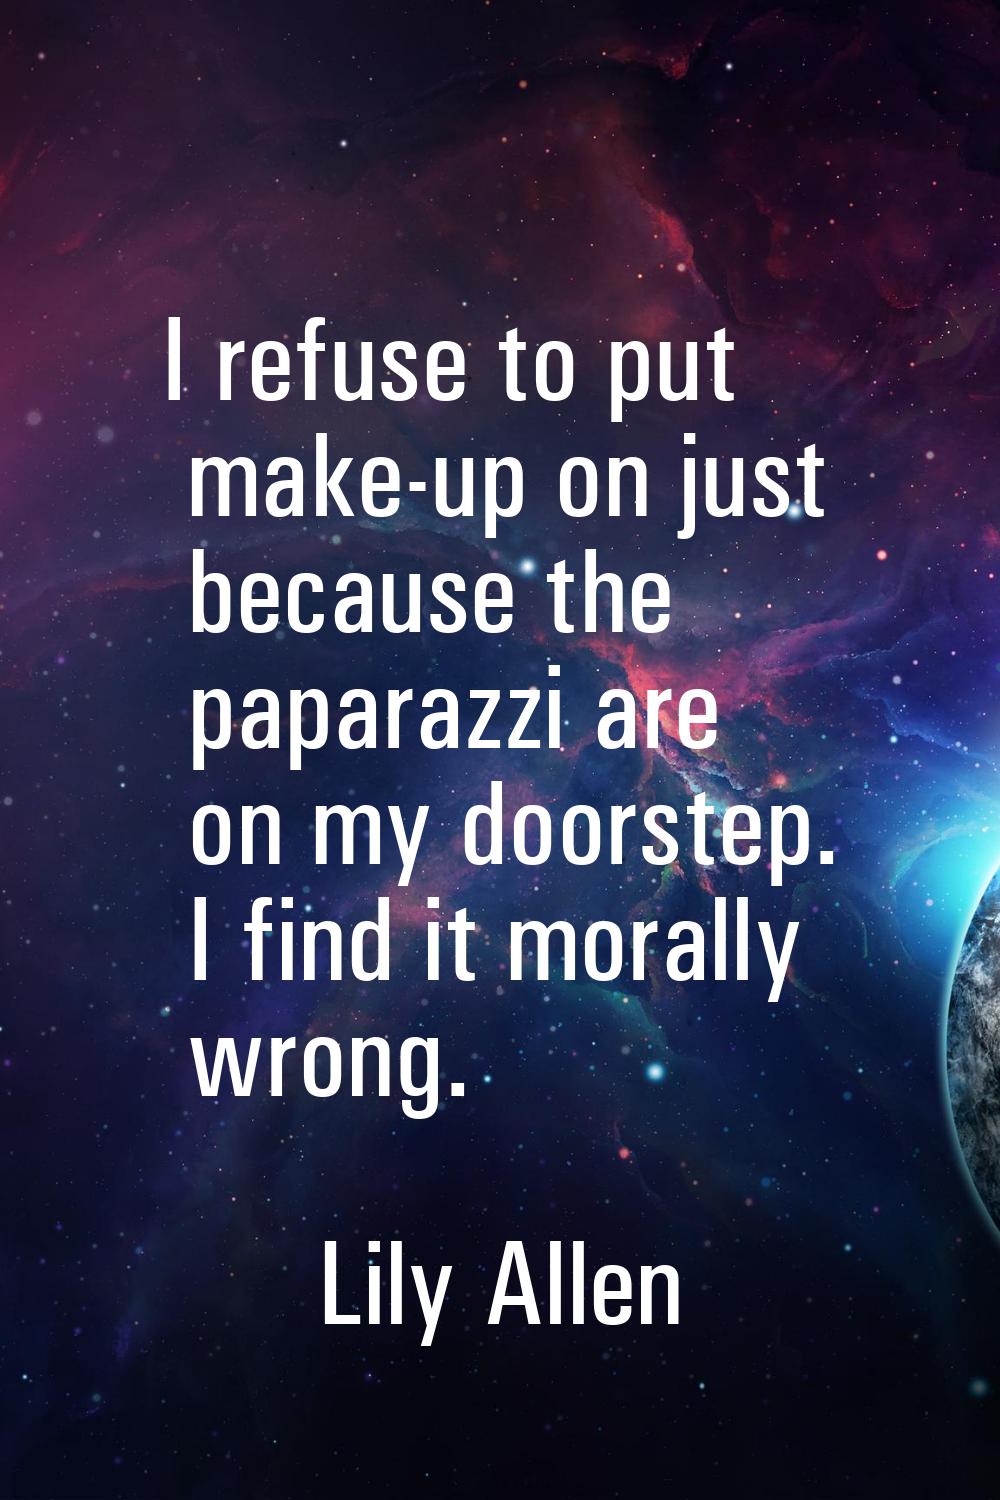 I refuse to put make-up on just because the paparazzi are on my doorstep. I find it morally wrong.